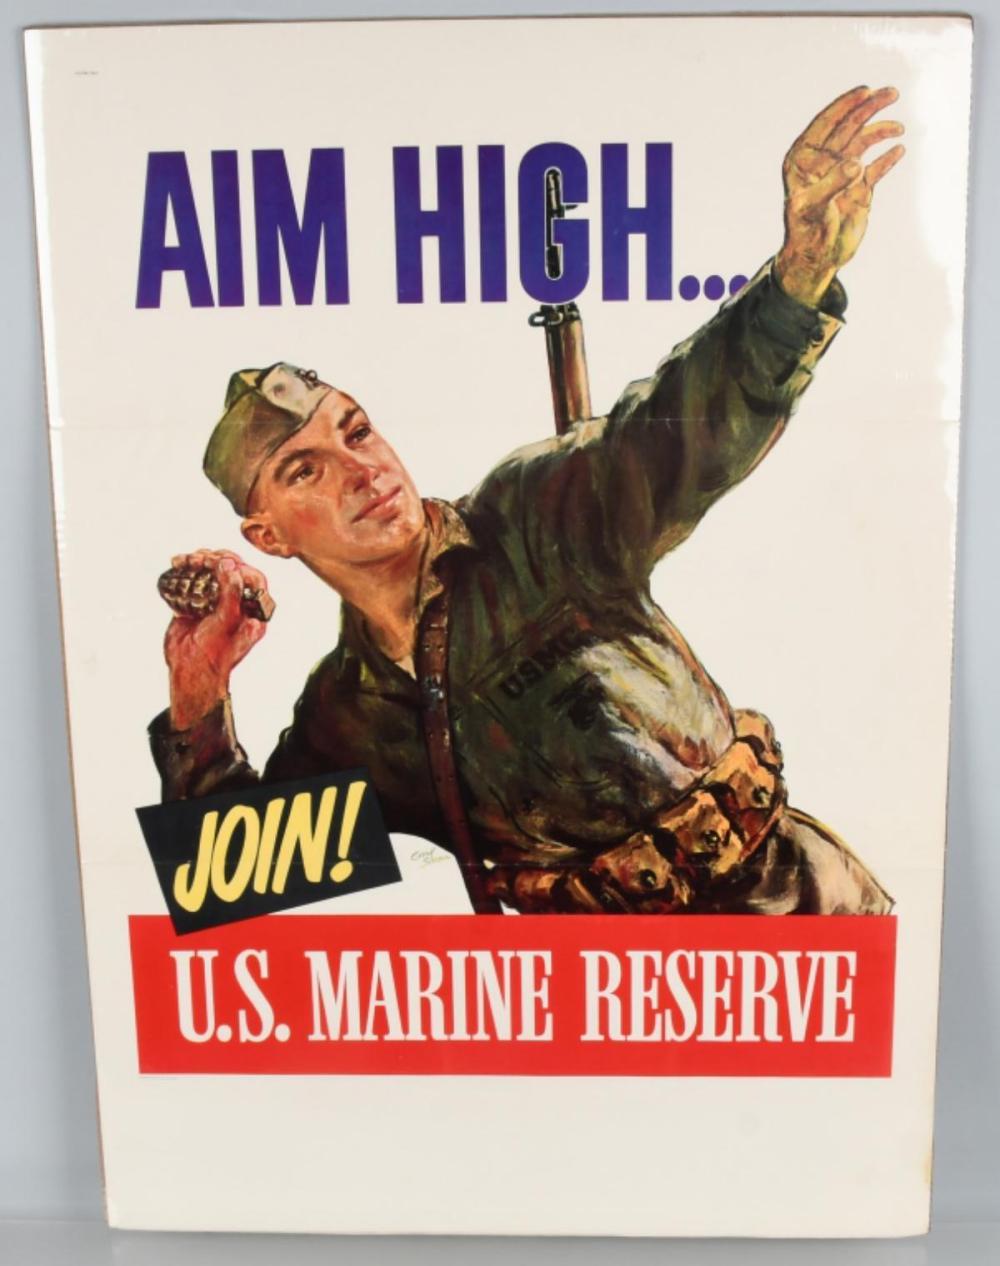 Offered is an original post-World War II U.S. Marine Corps recruiting poster entitled 